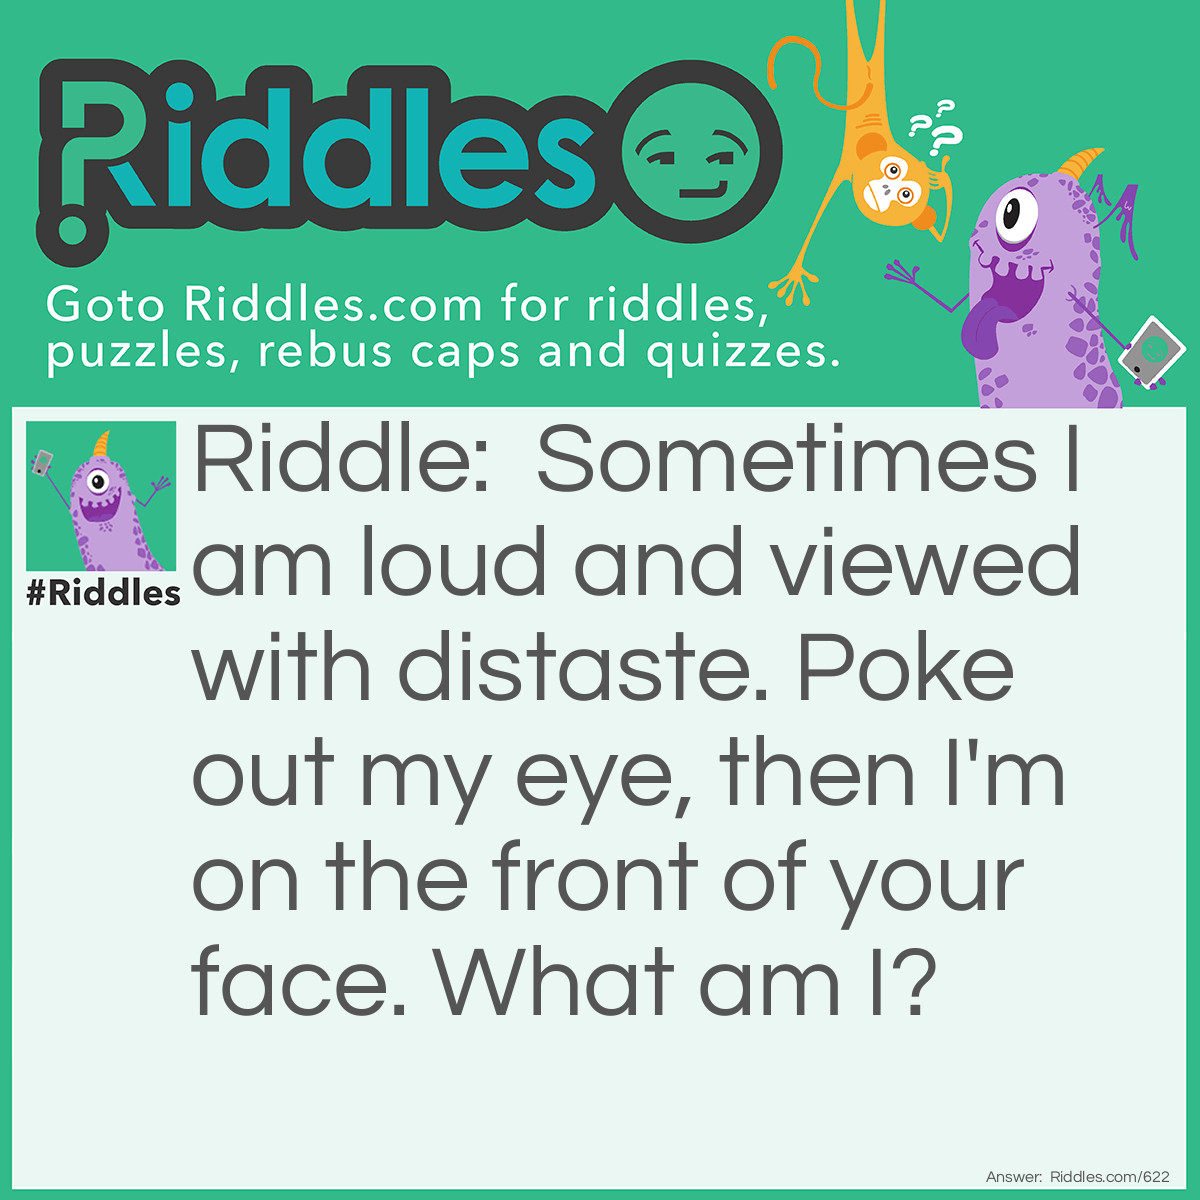 Riddle: Sometimes I am loud and viewed with distaste. Poke out my eye, then I'm on the front of your face. What am I? Answer: A noise, remove the "eye" aka "i" and you get a nose.